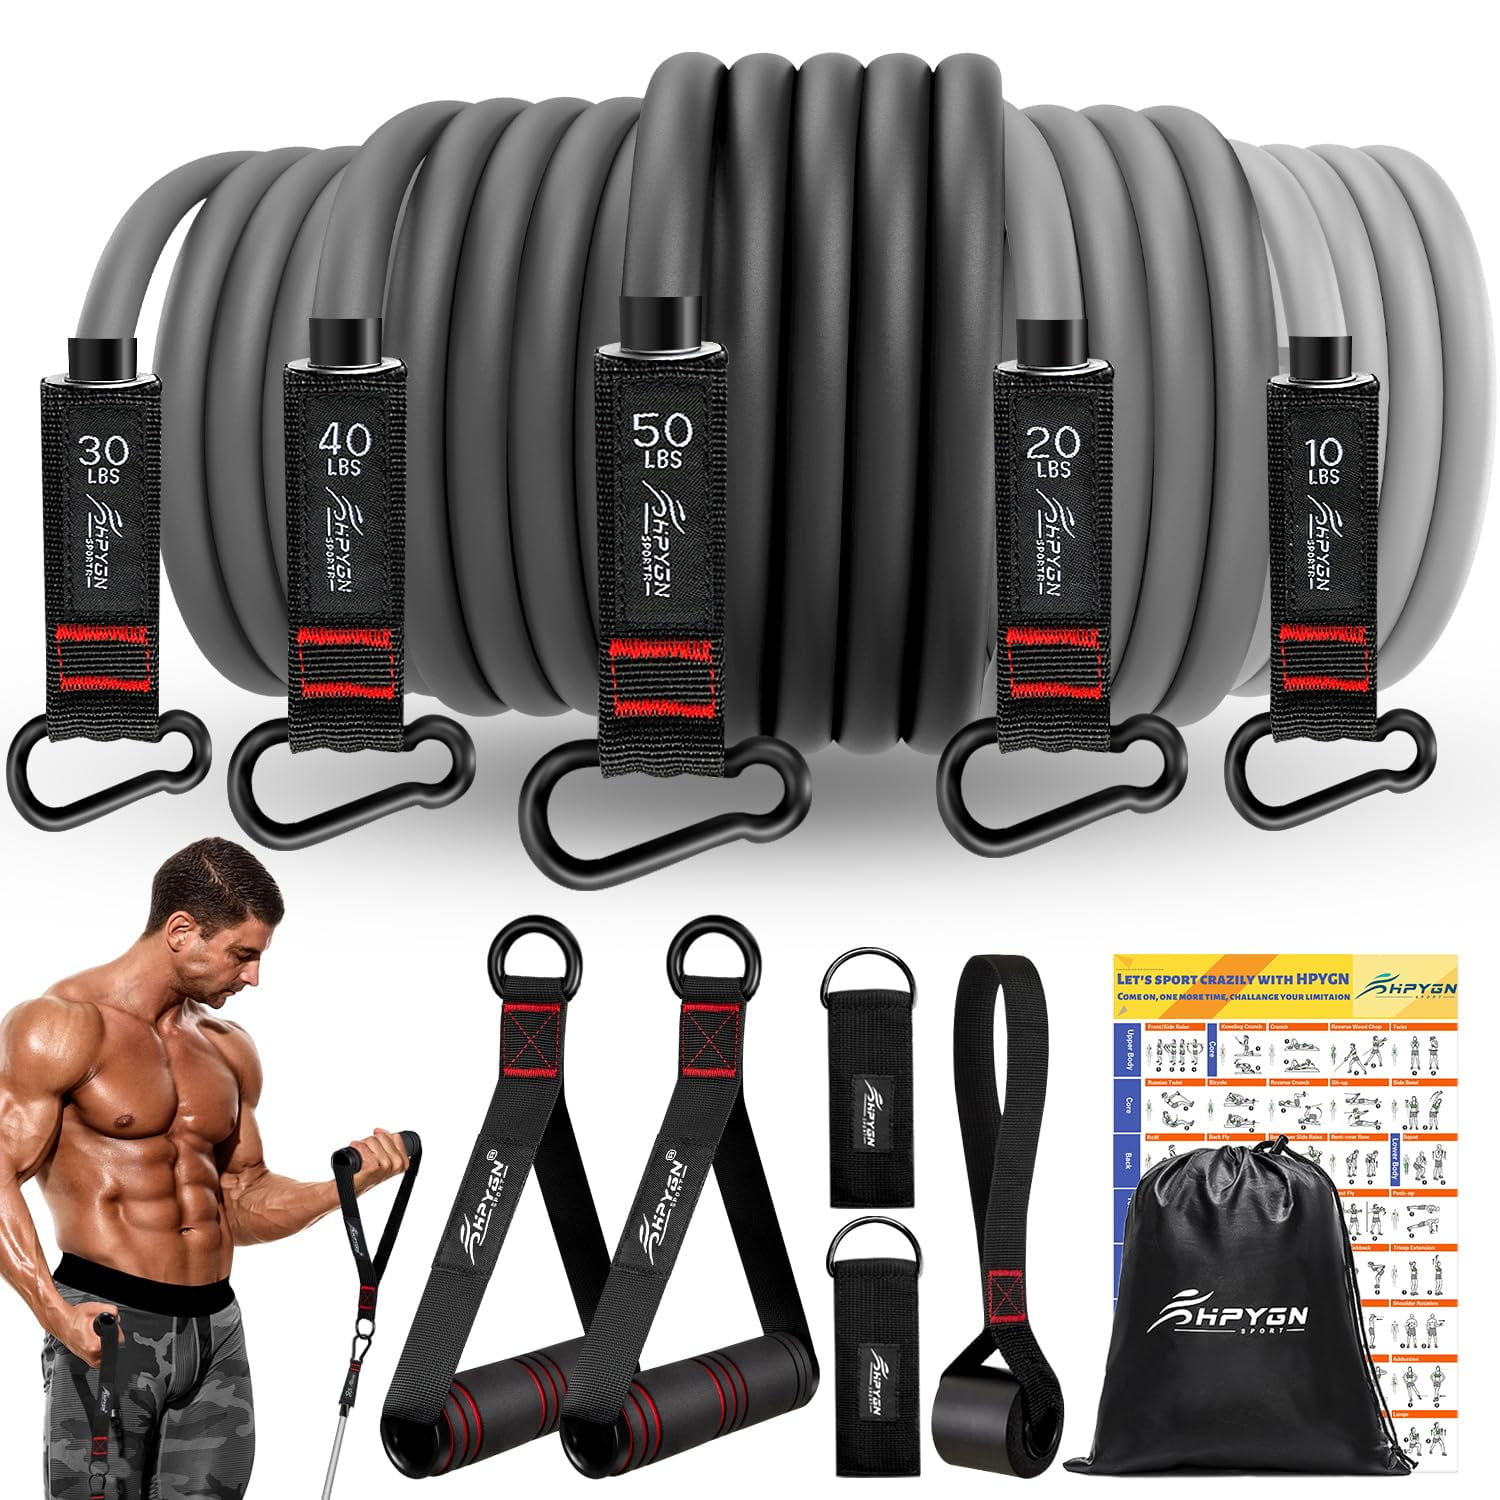 Sxbd Funct Tens Rope, 4-tube Pedal Puller Ance , Tens Rope Fitness  Equipment, Compatible With Abdom